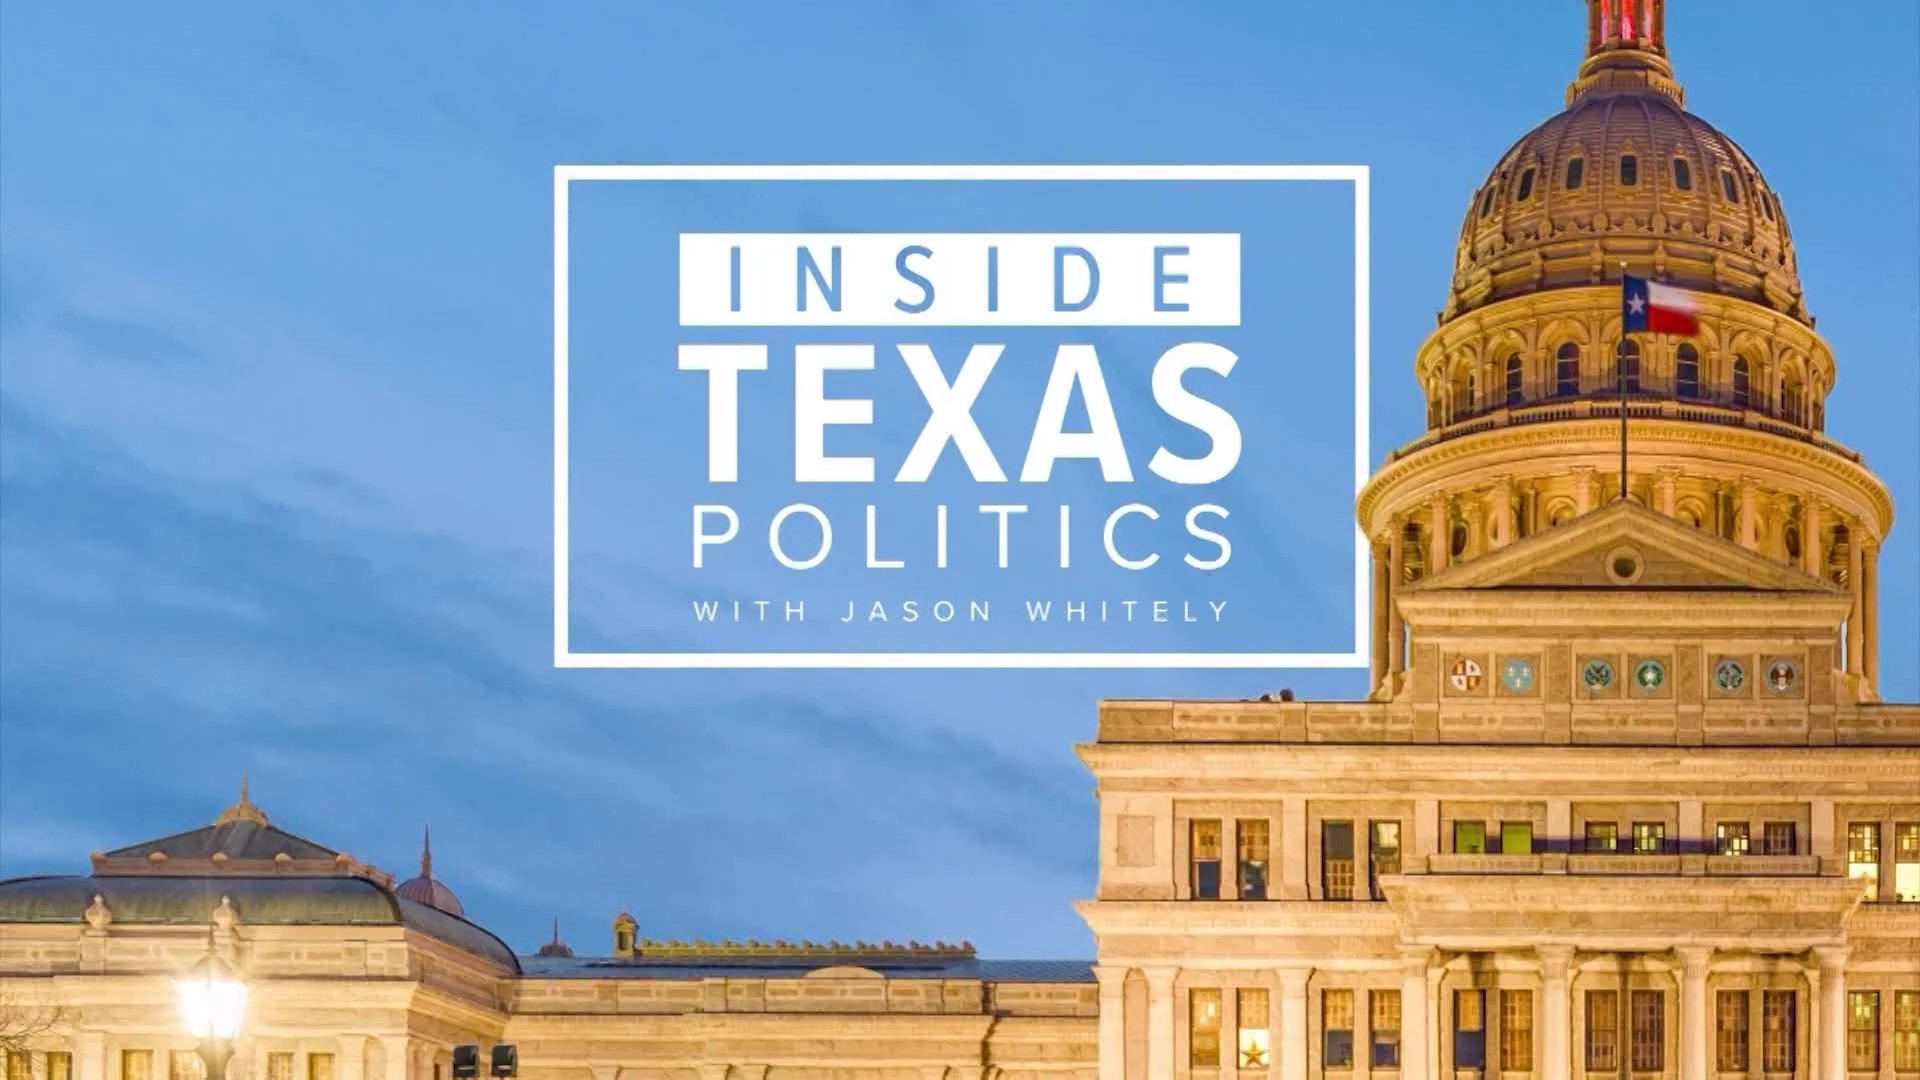 Incumbent Jennifer Stoddard-Hajdu and and former Congressman and Texas Republican party chair Allen West are running to serve as chair of the Dallas County GOP.